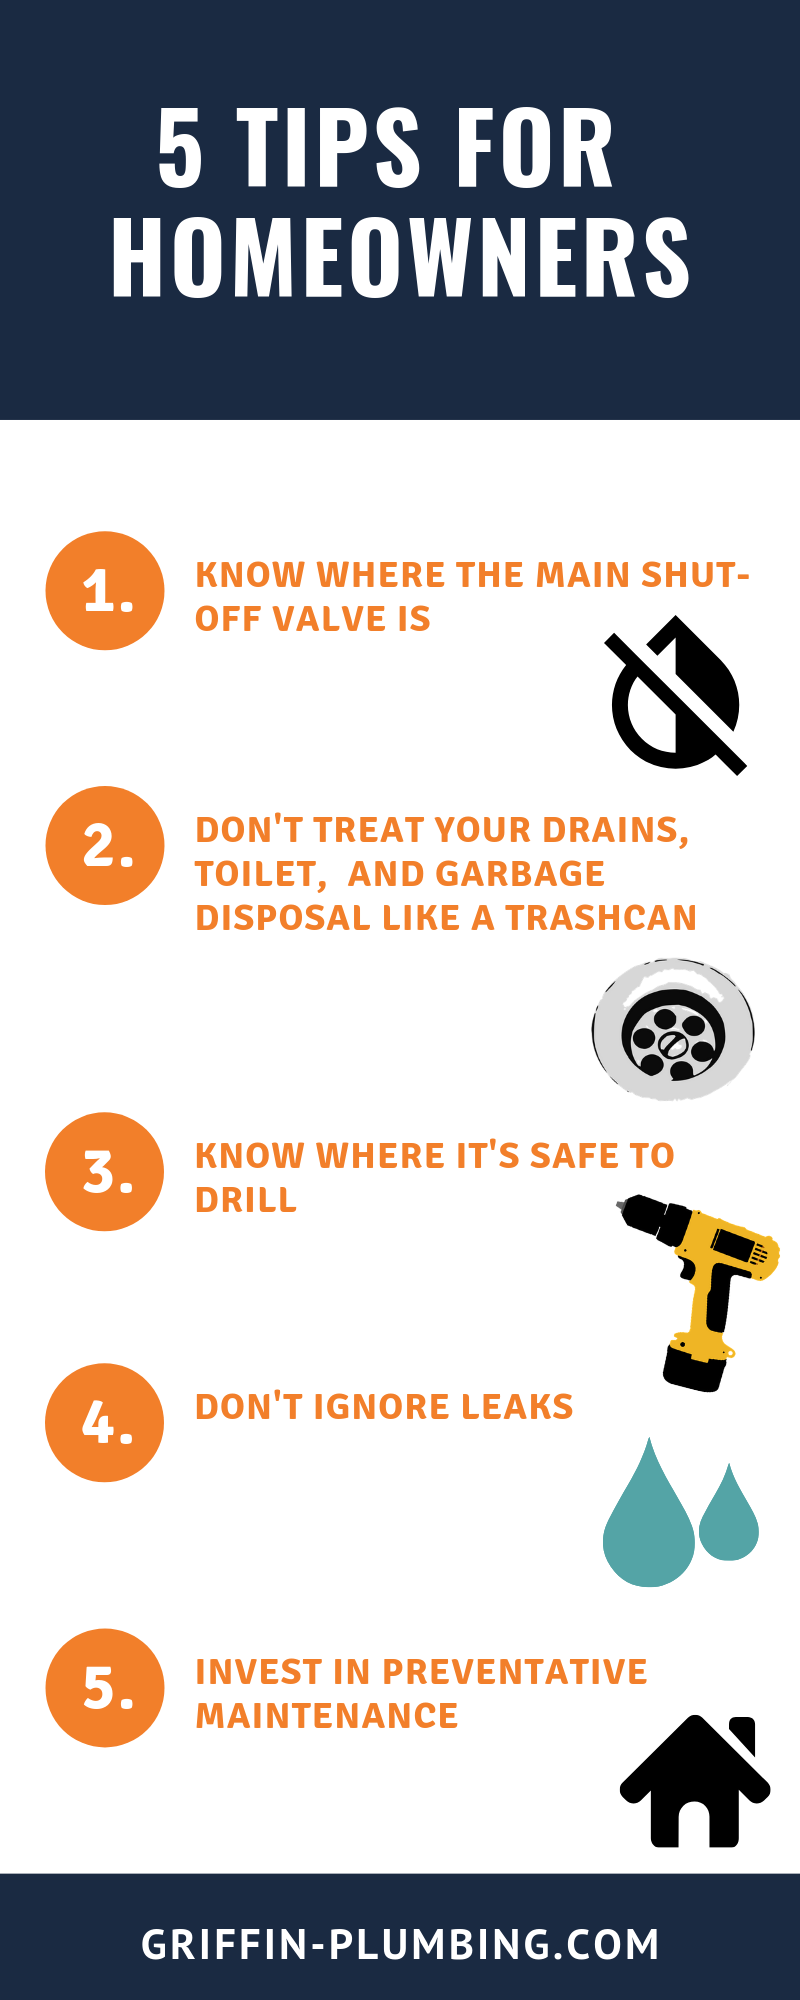 Plumbing Tips - Donâ€™t Pour Grease Or Oil Down The Drain